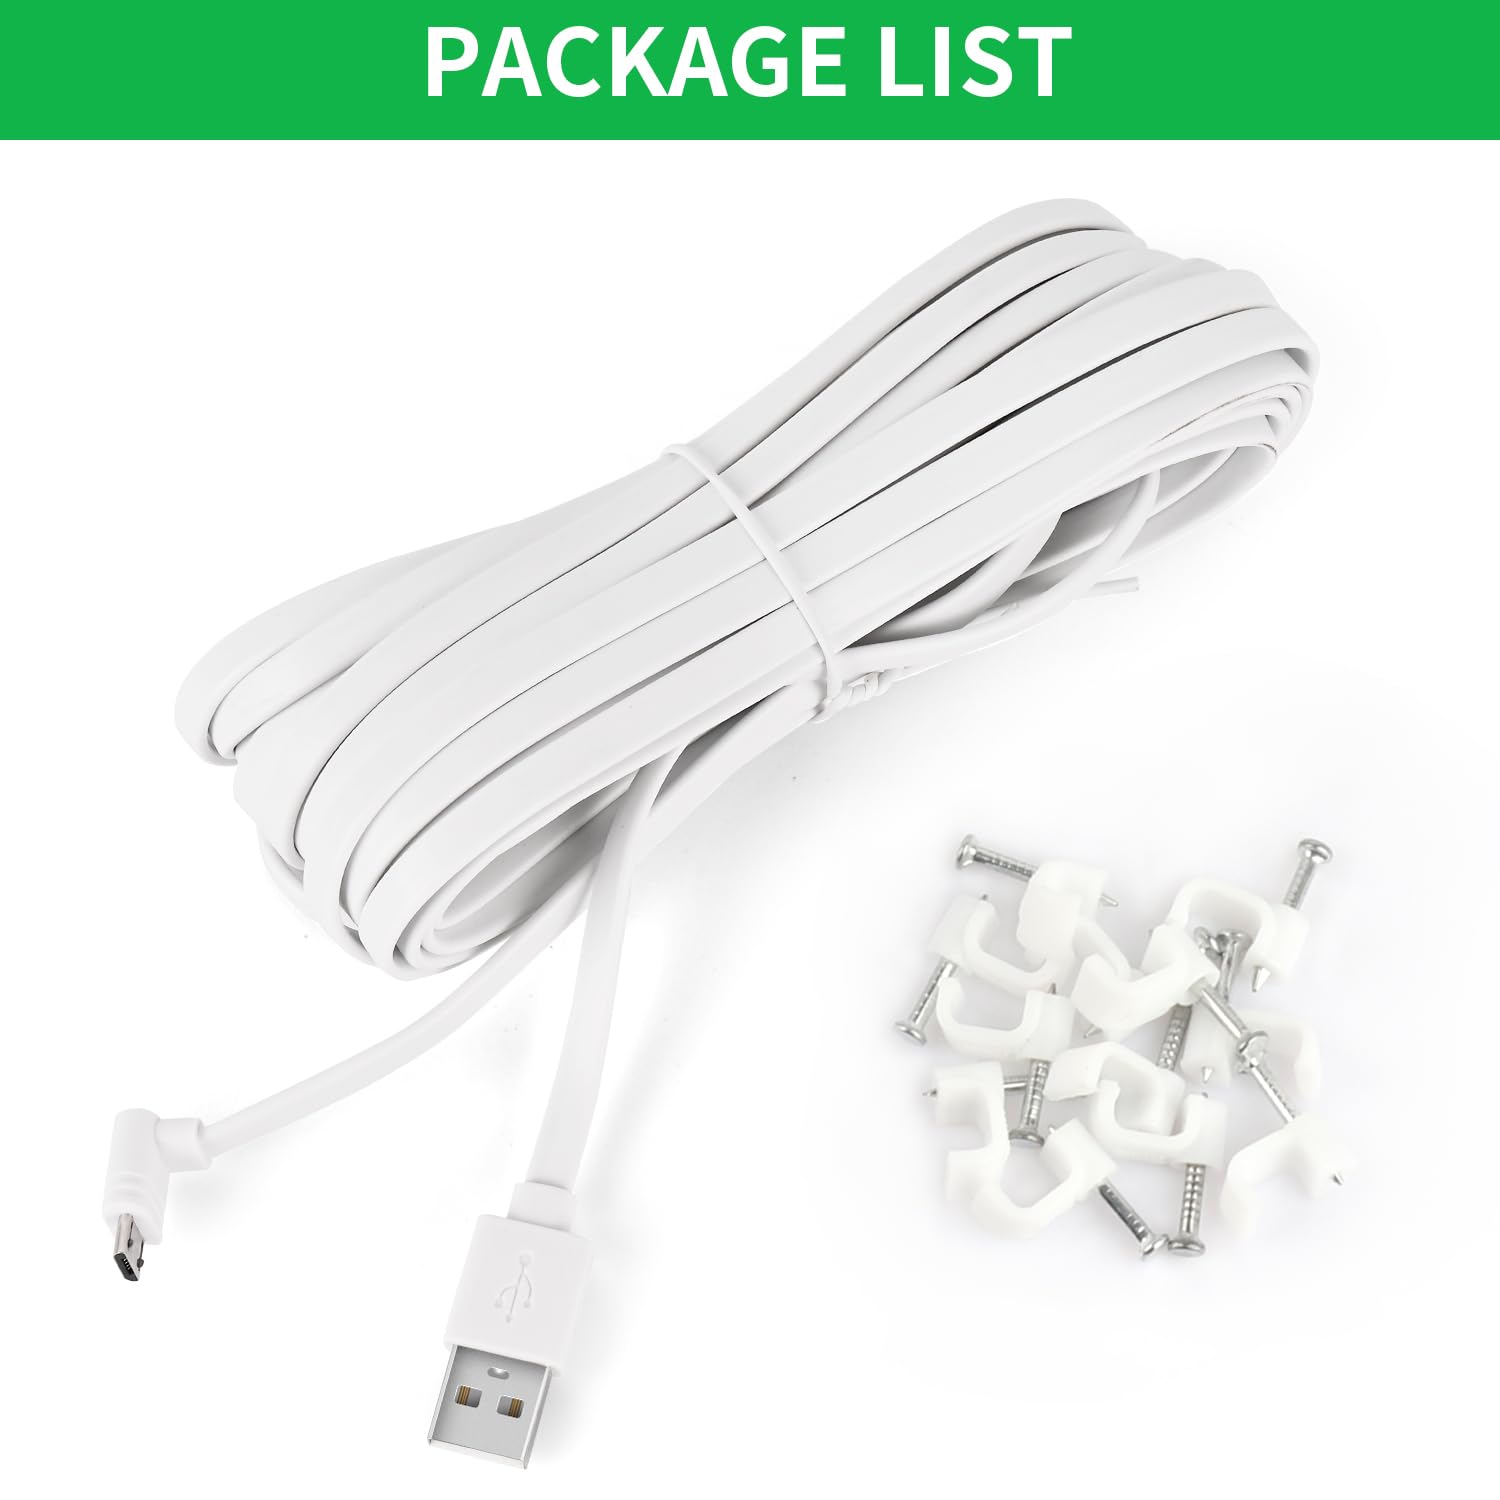 30FT Power Cable Compatible with WYZE Cam Pan V3, 90 Degree L-Shaped Flat Micro USB Extension Cable for WYZE Cam Pan V3 (White)